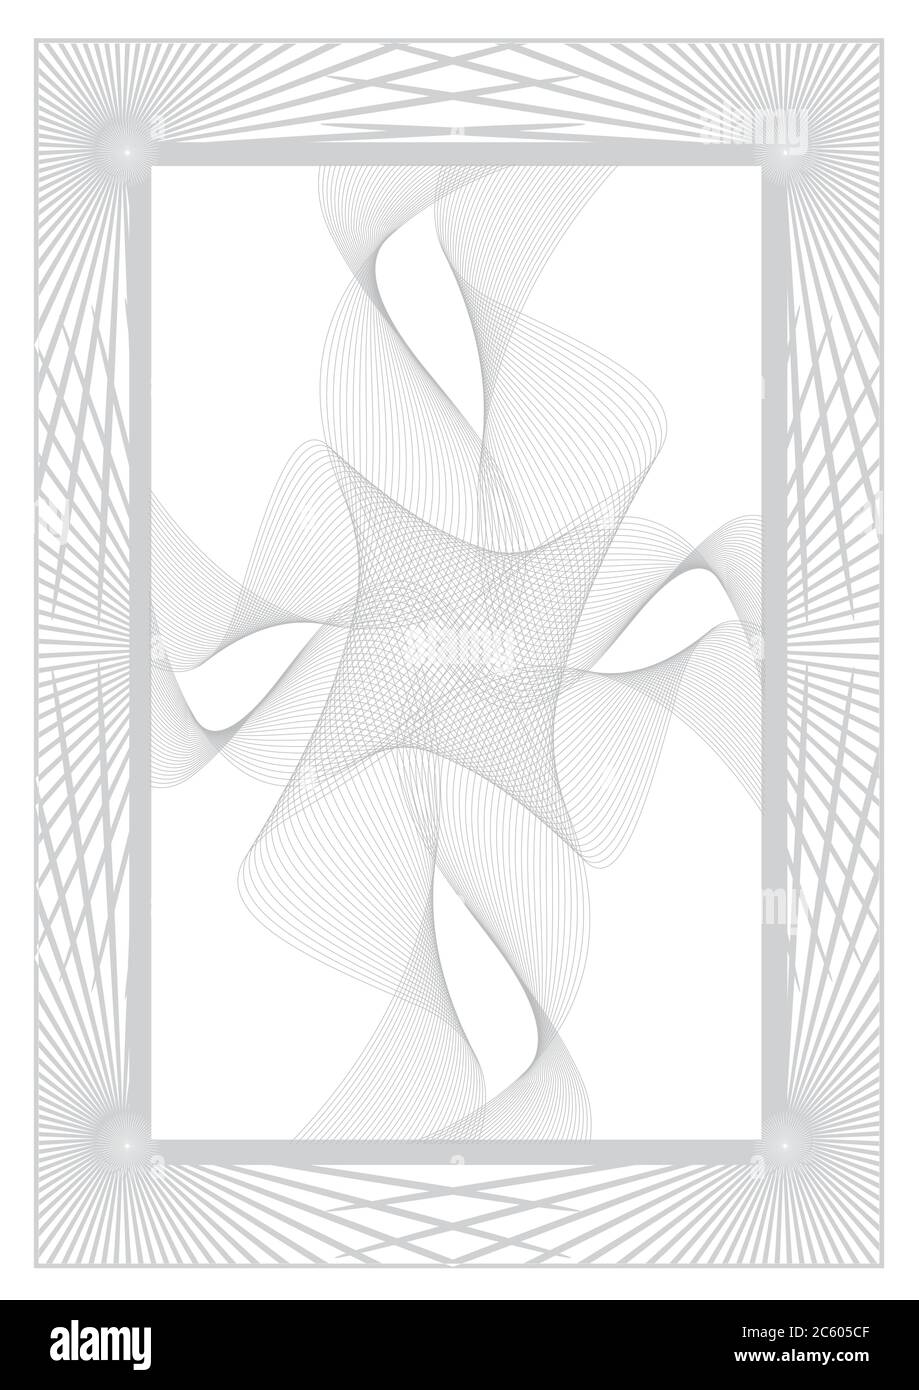 Grey Abstract background certificate. Illustration of grey background with wavy cross motif.Vector available. Stock Vector